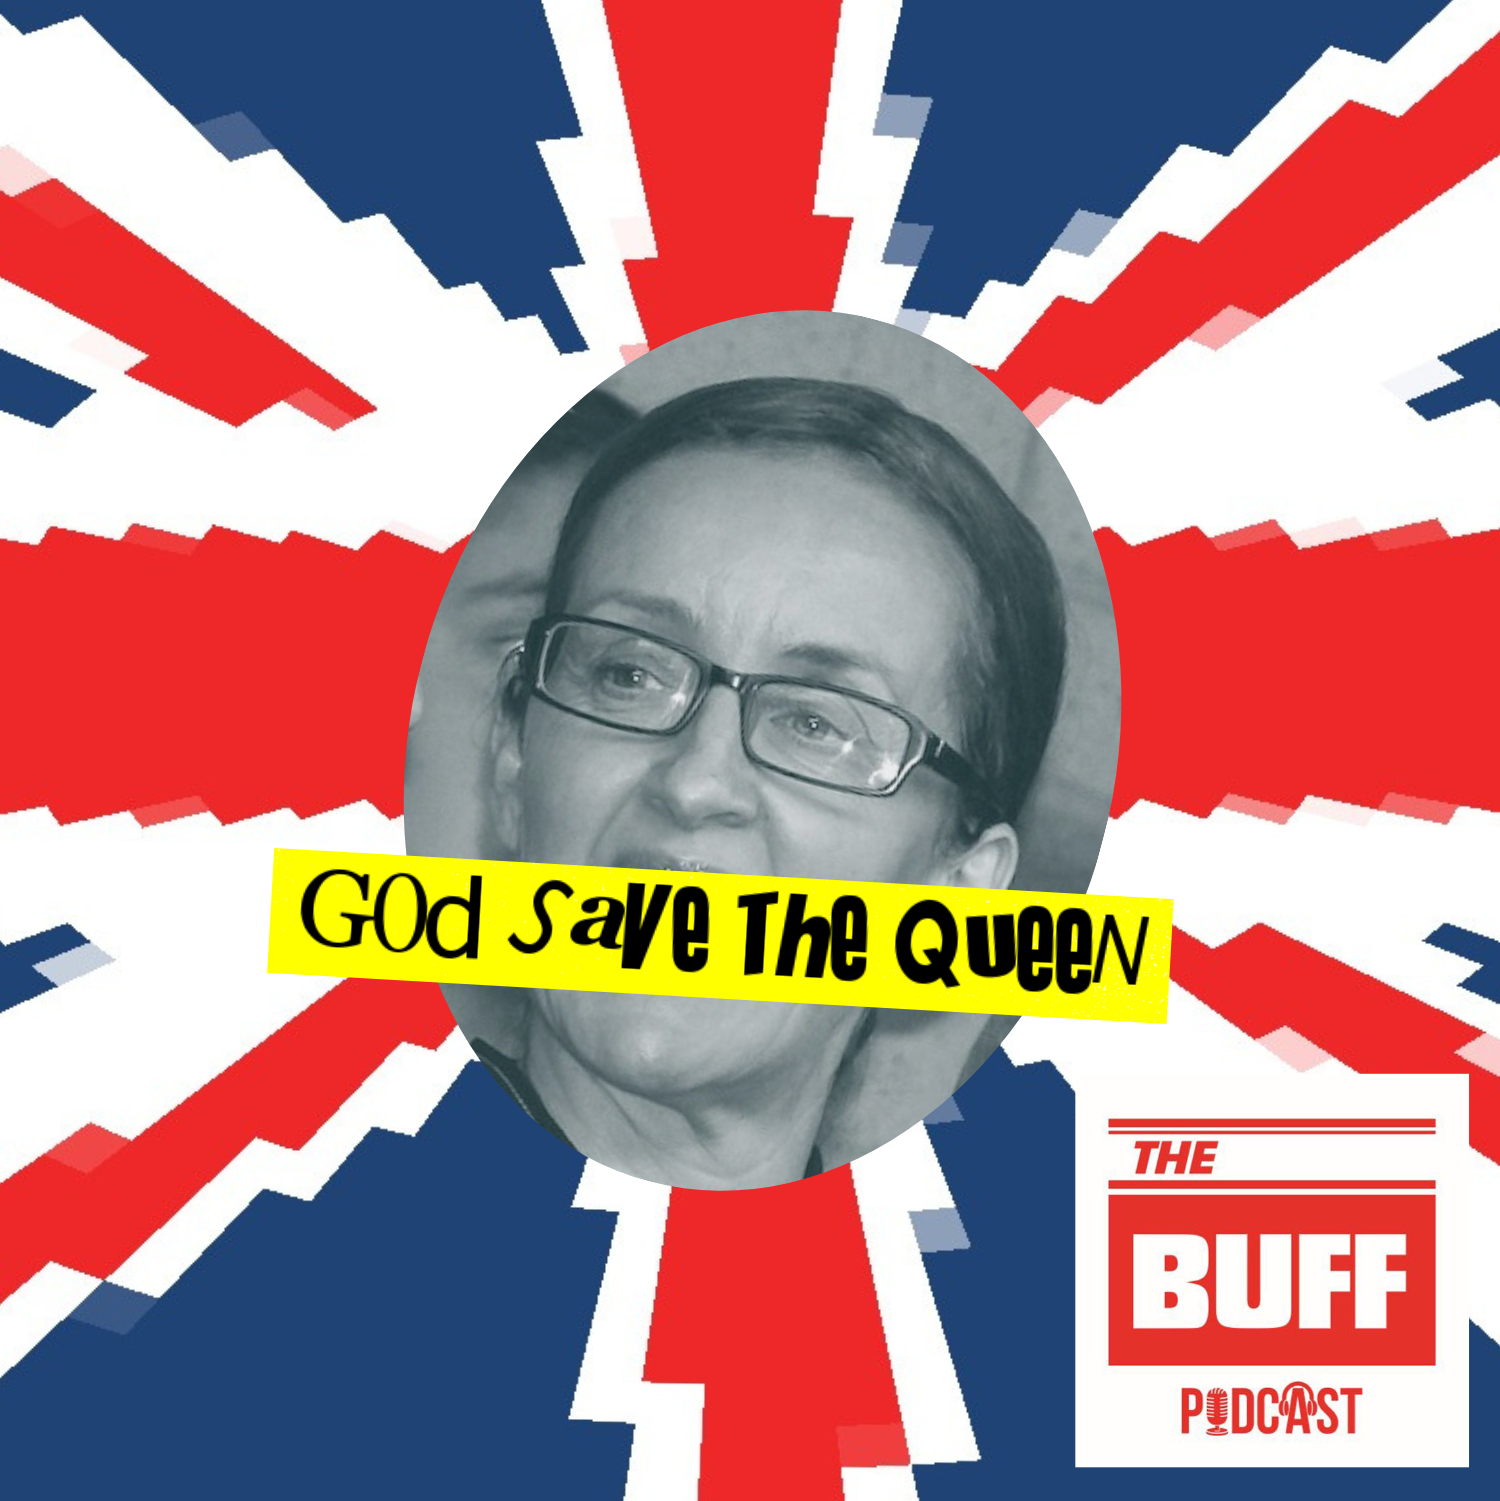 The Buff Podcast presents: God Save the Queen!